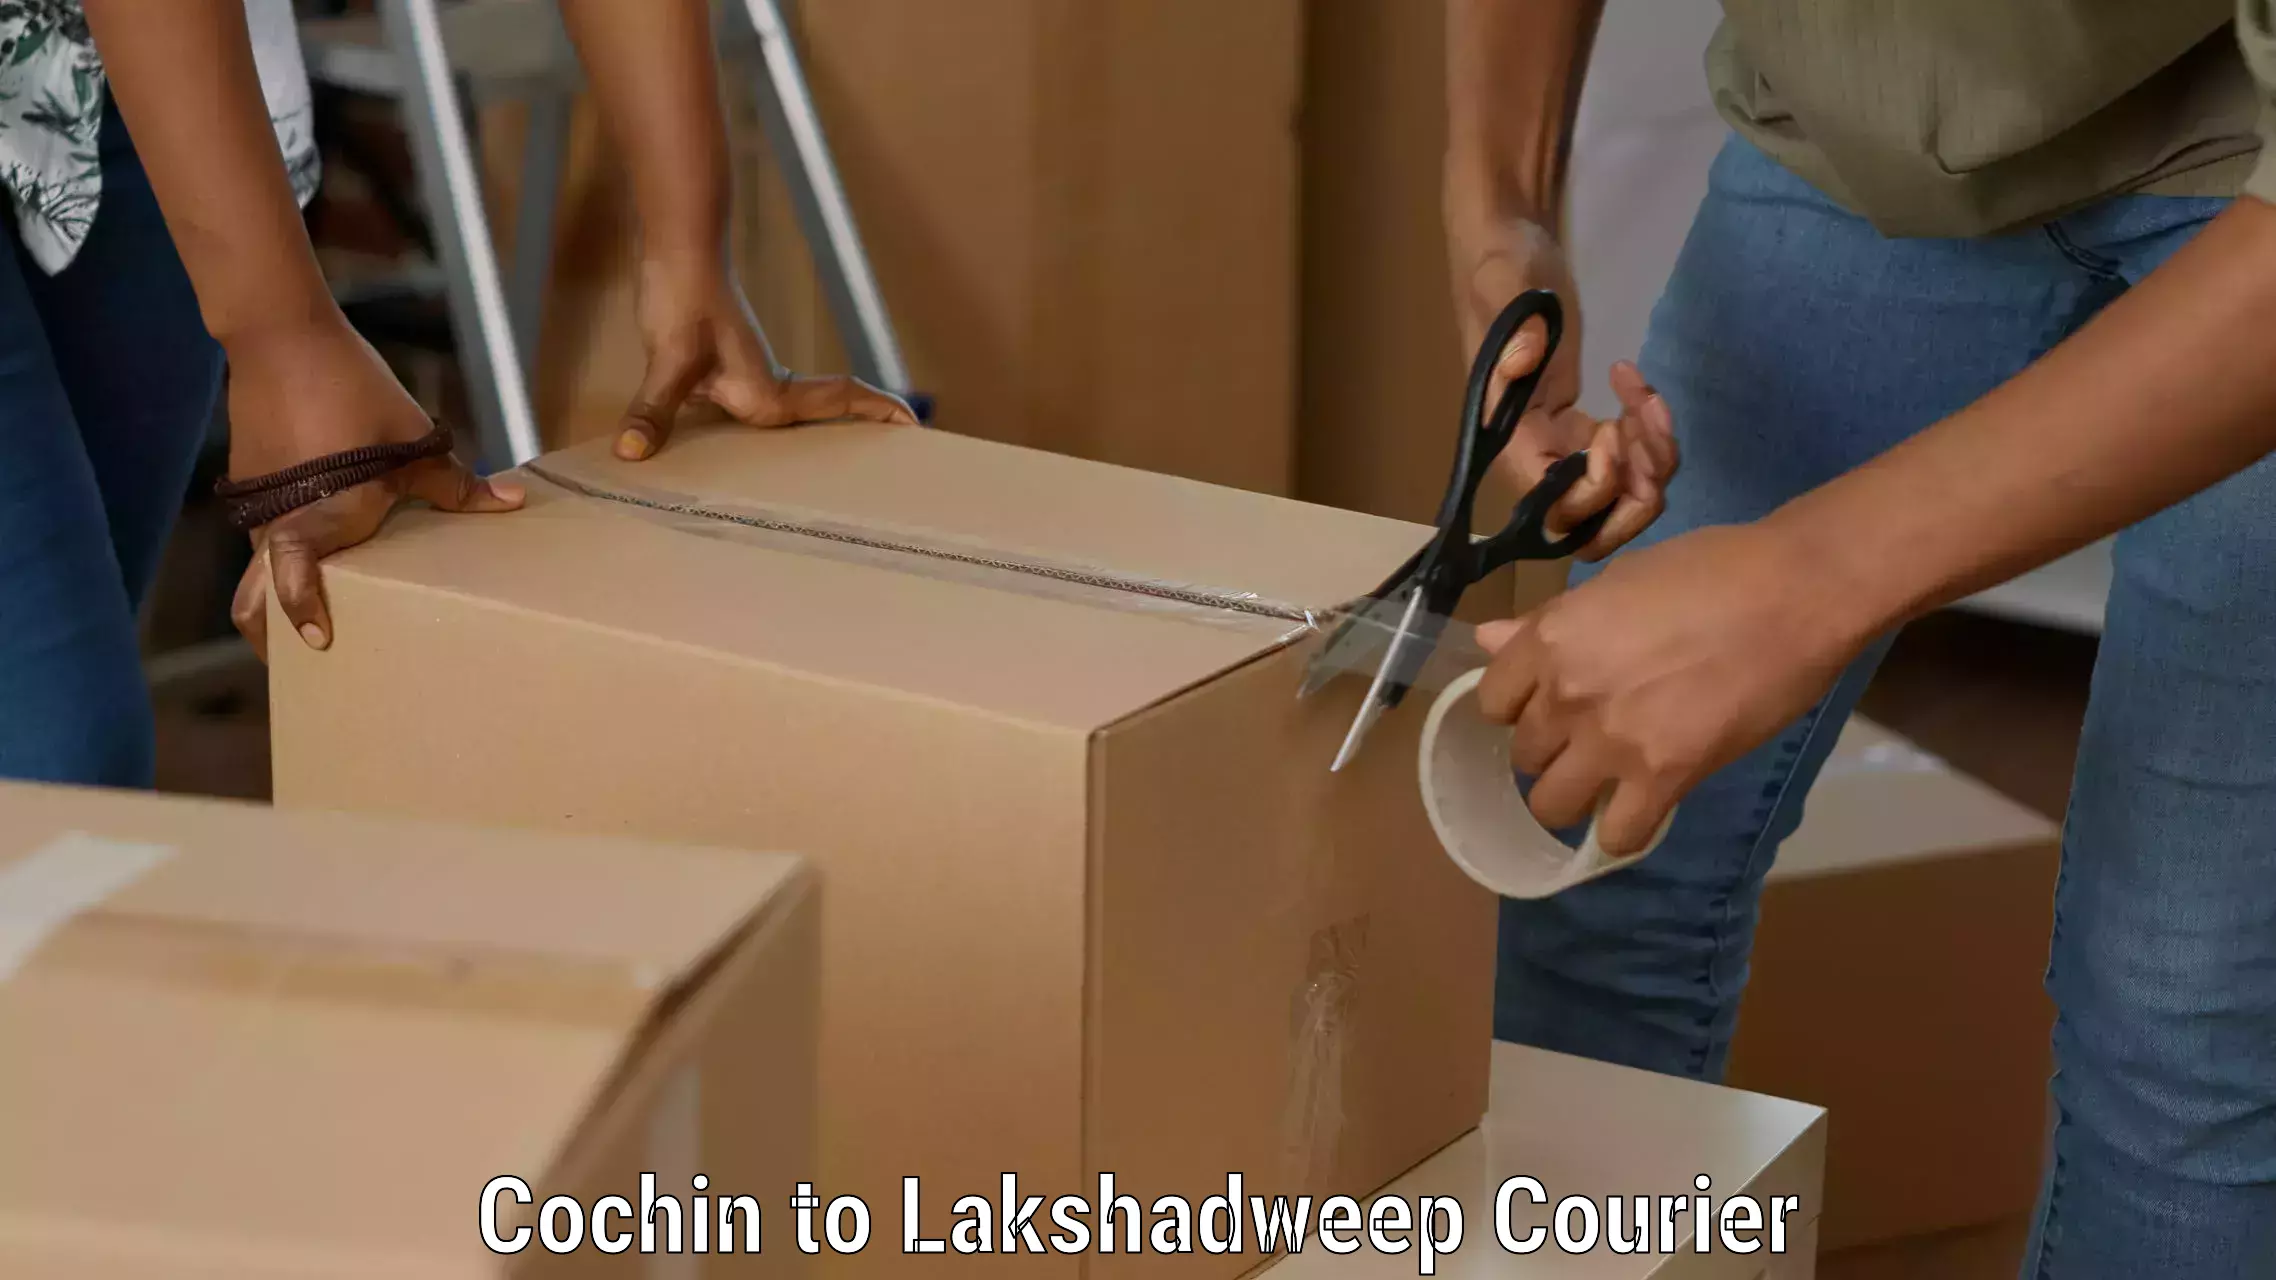 Courier service comparison Cochin to Lakshadweep